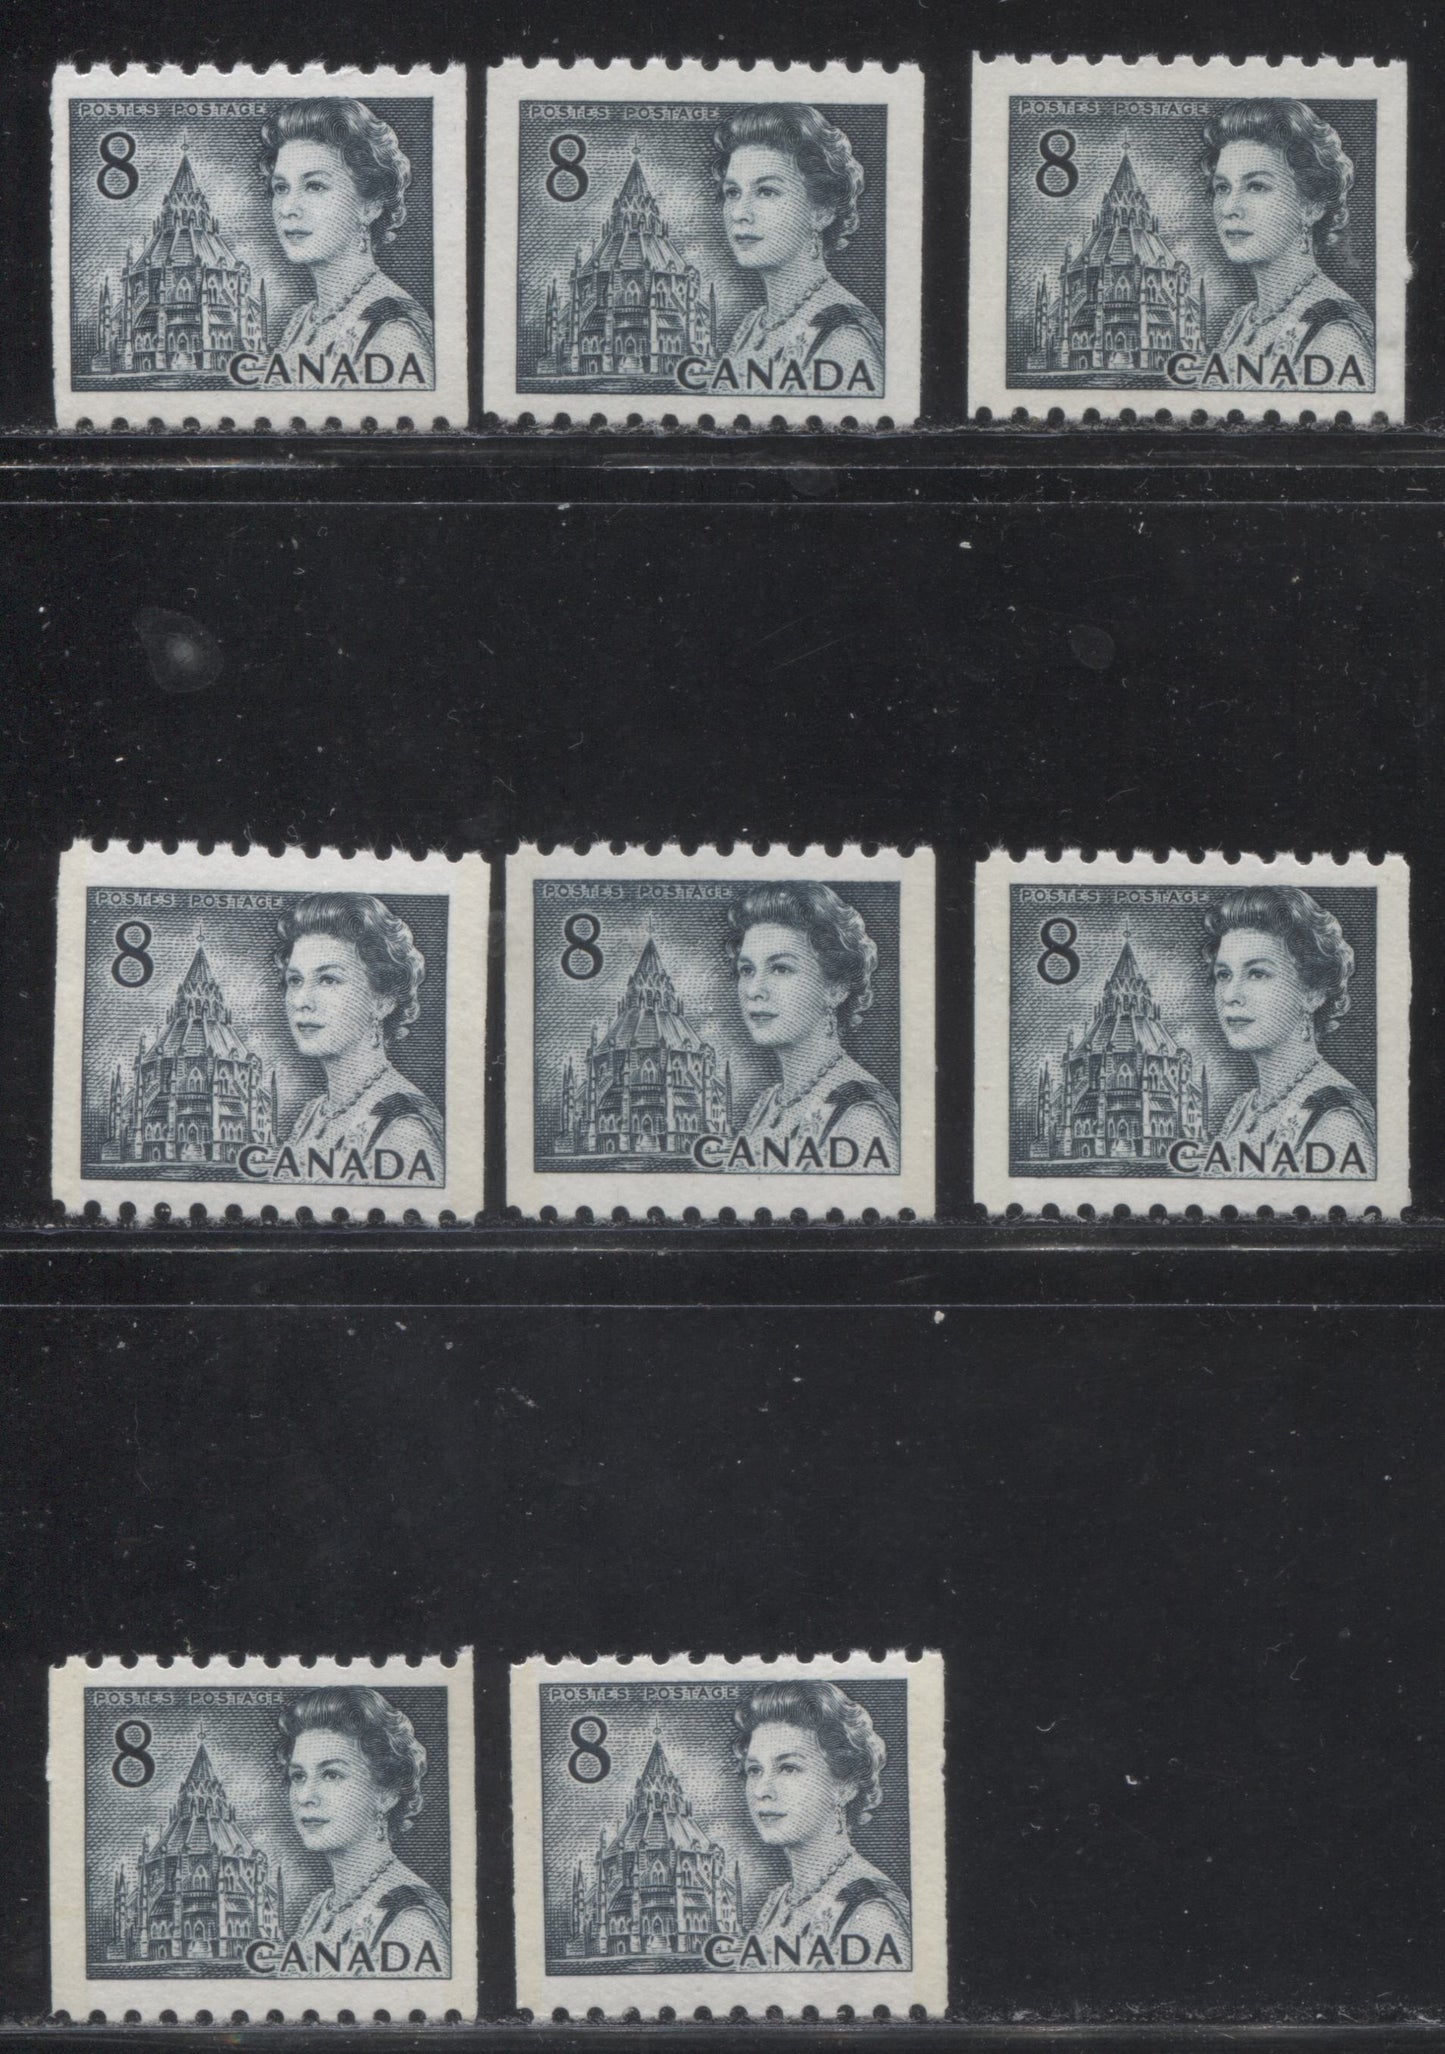 Lot 96 Canada #550-pv 8c Slate Queen Elizabeth II, 1967-1973 Centennial Issue, Eight VFNH Tagged & Untagged Coil Singles On Various Fluorescent Papers With Satin & Eggshell PVA Gums